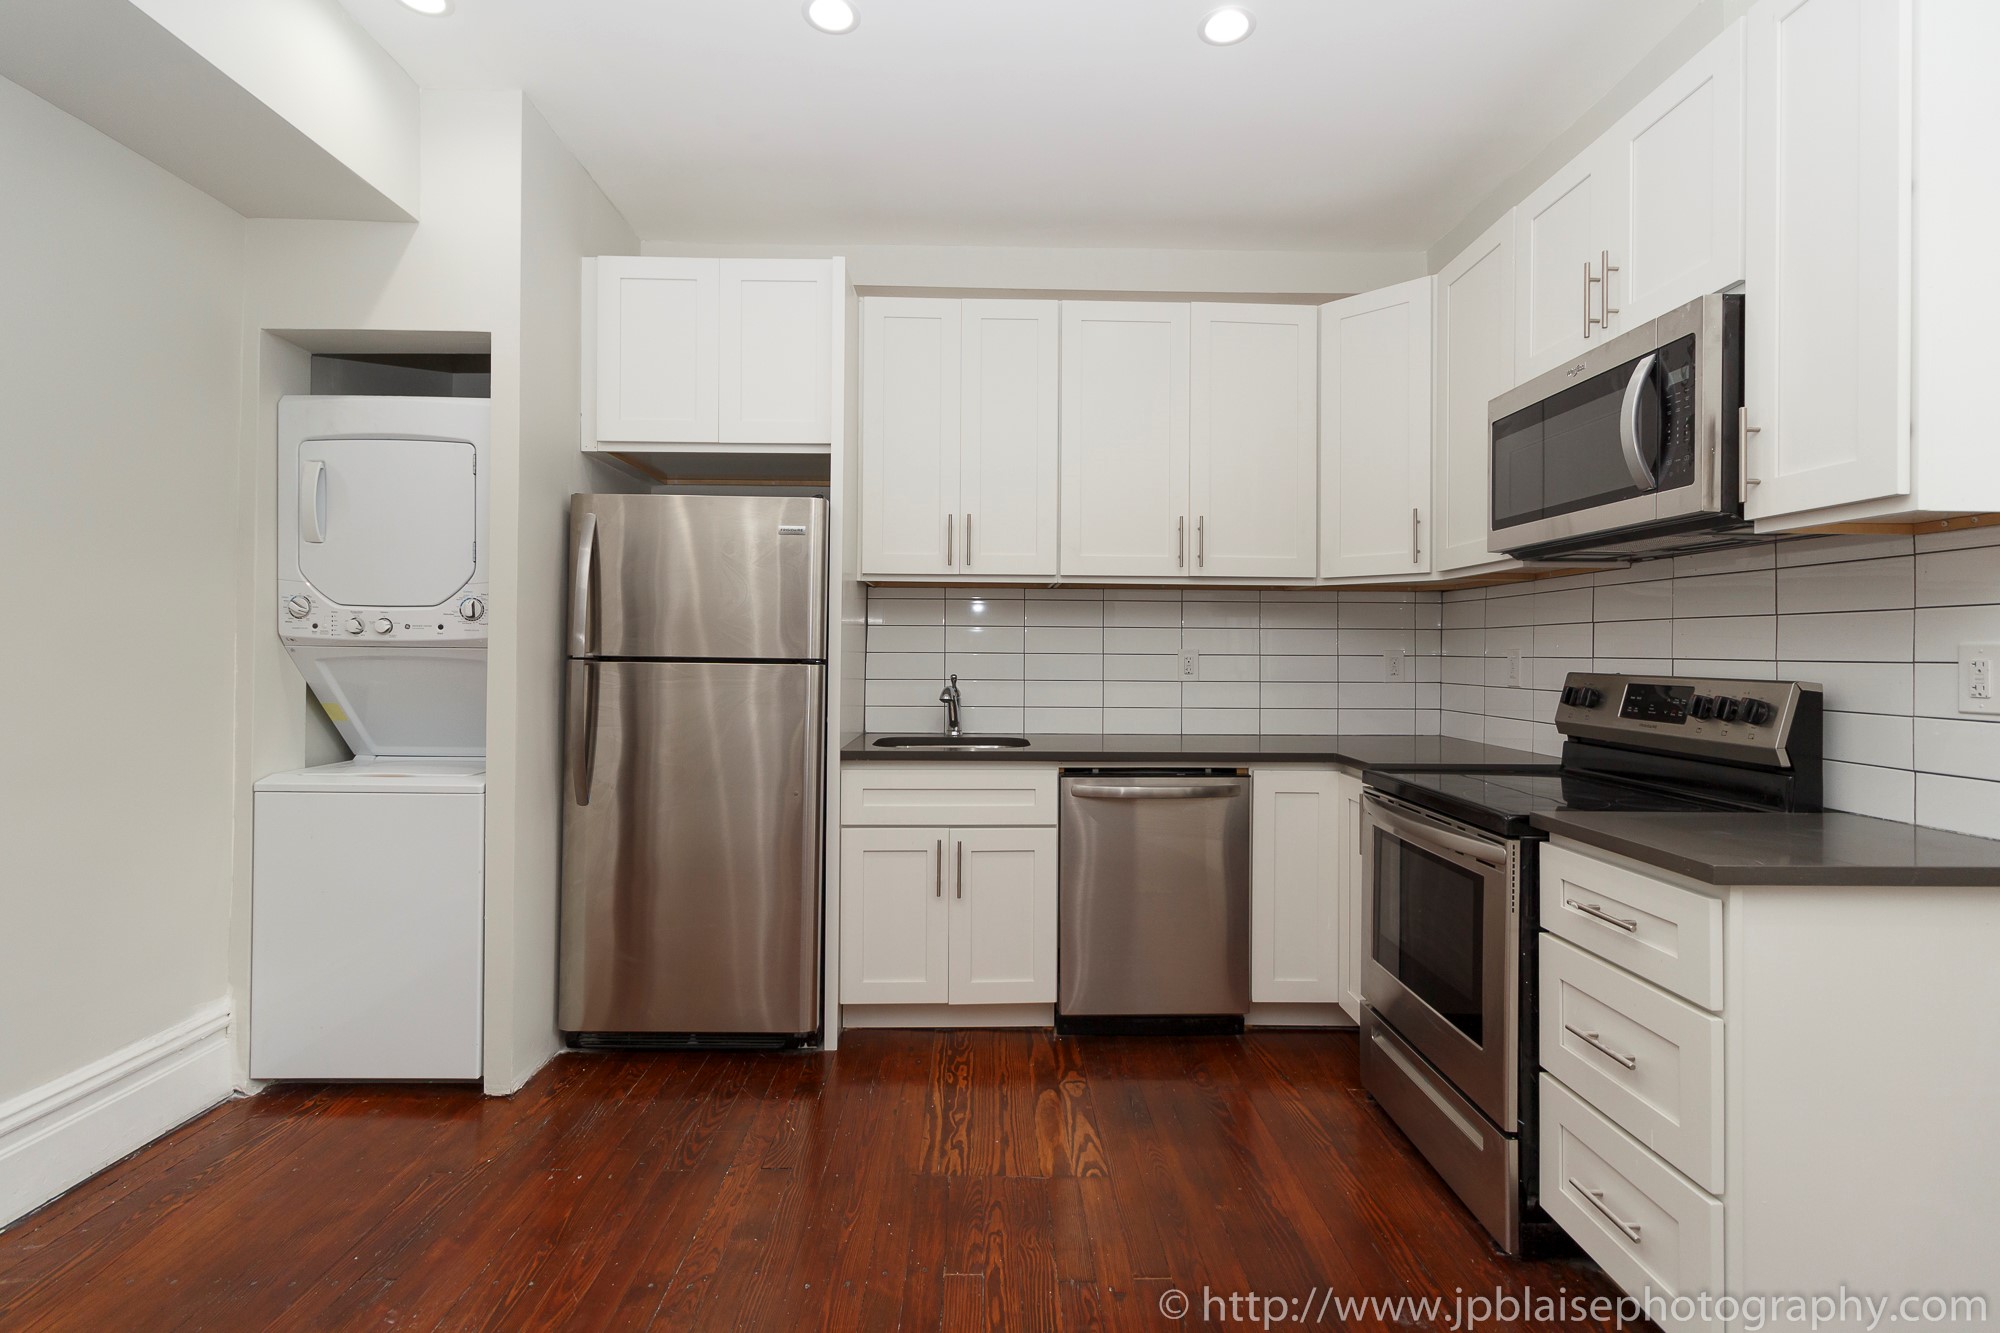 New york apartment photographer work House for sale Flatbush Brooklyn ny interior real estate photography living